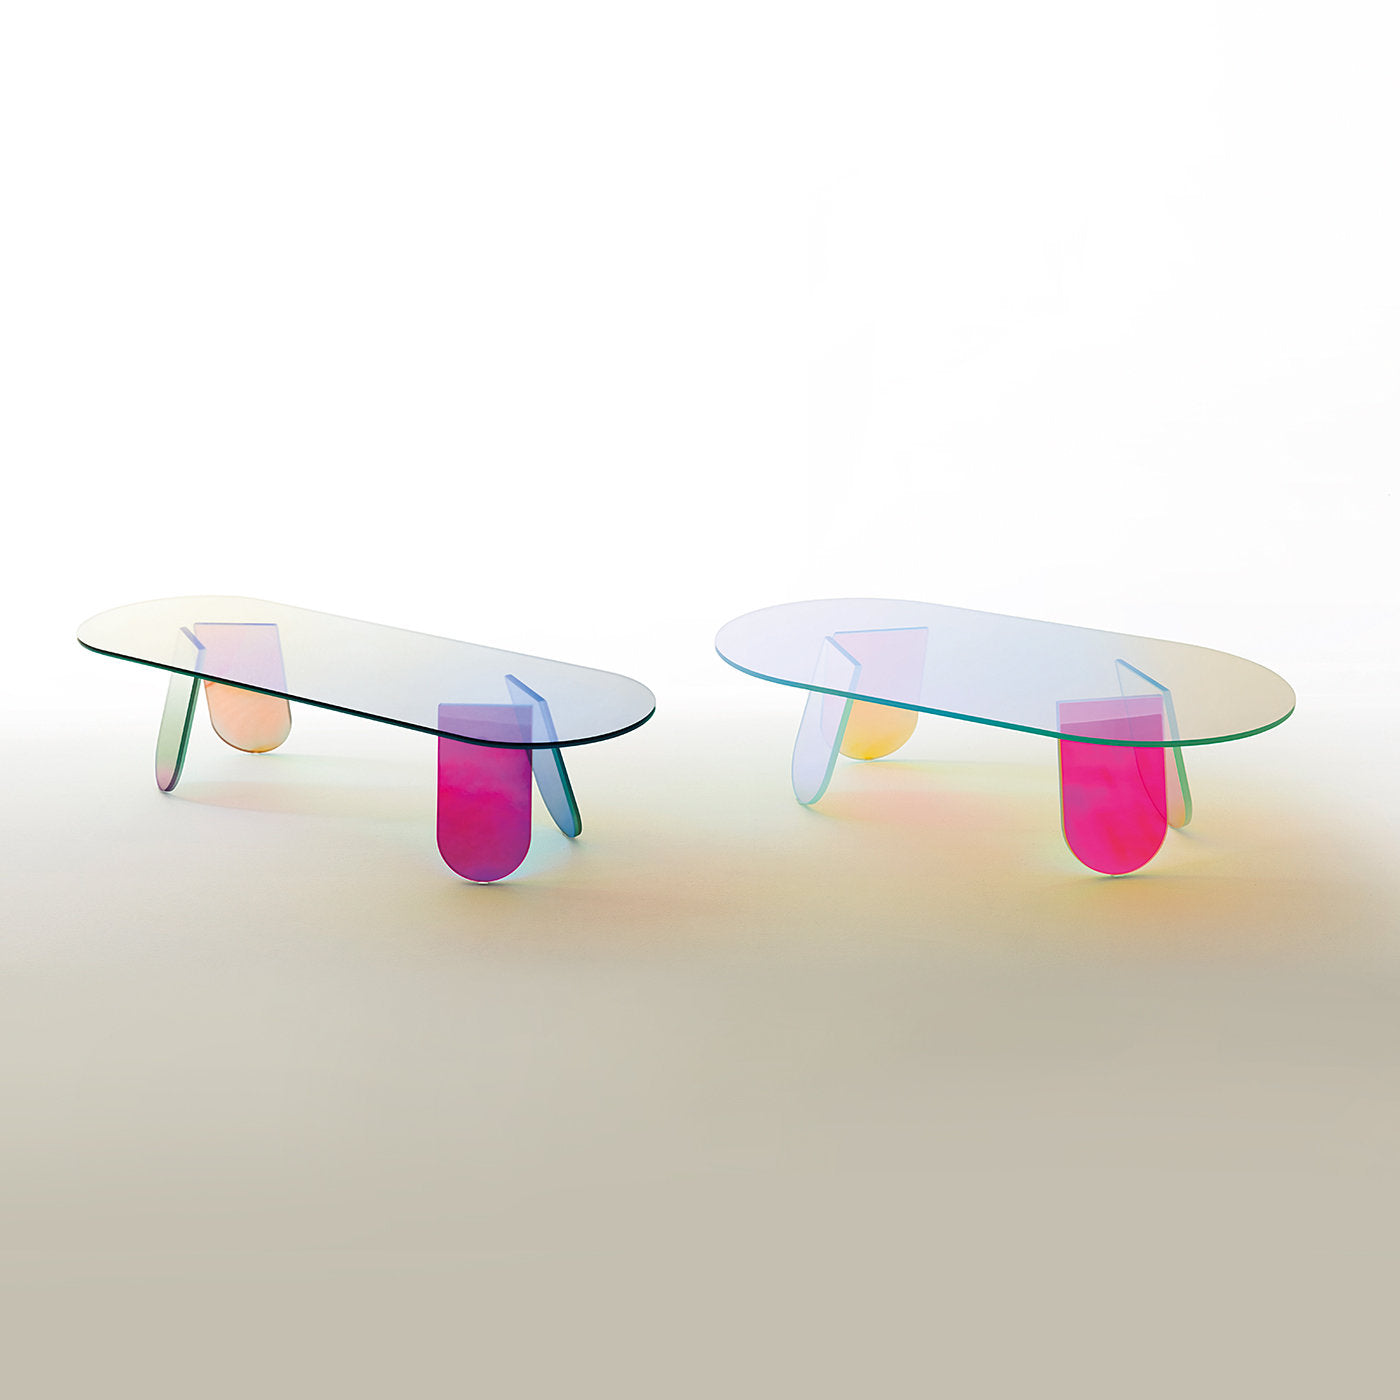 Shimmer Large Low Table by Patricia Urquiola - Alternative view 1